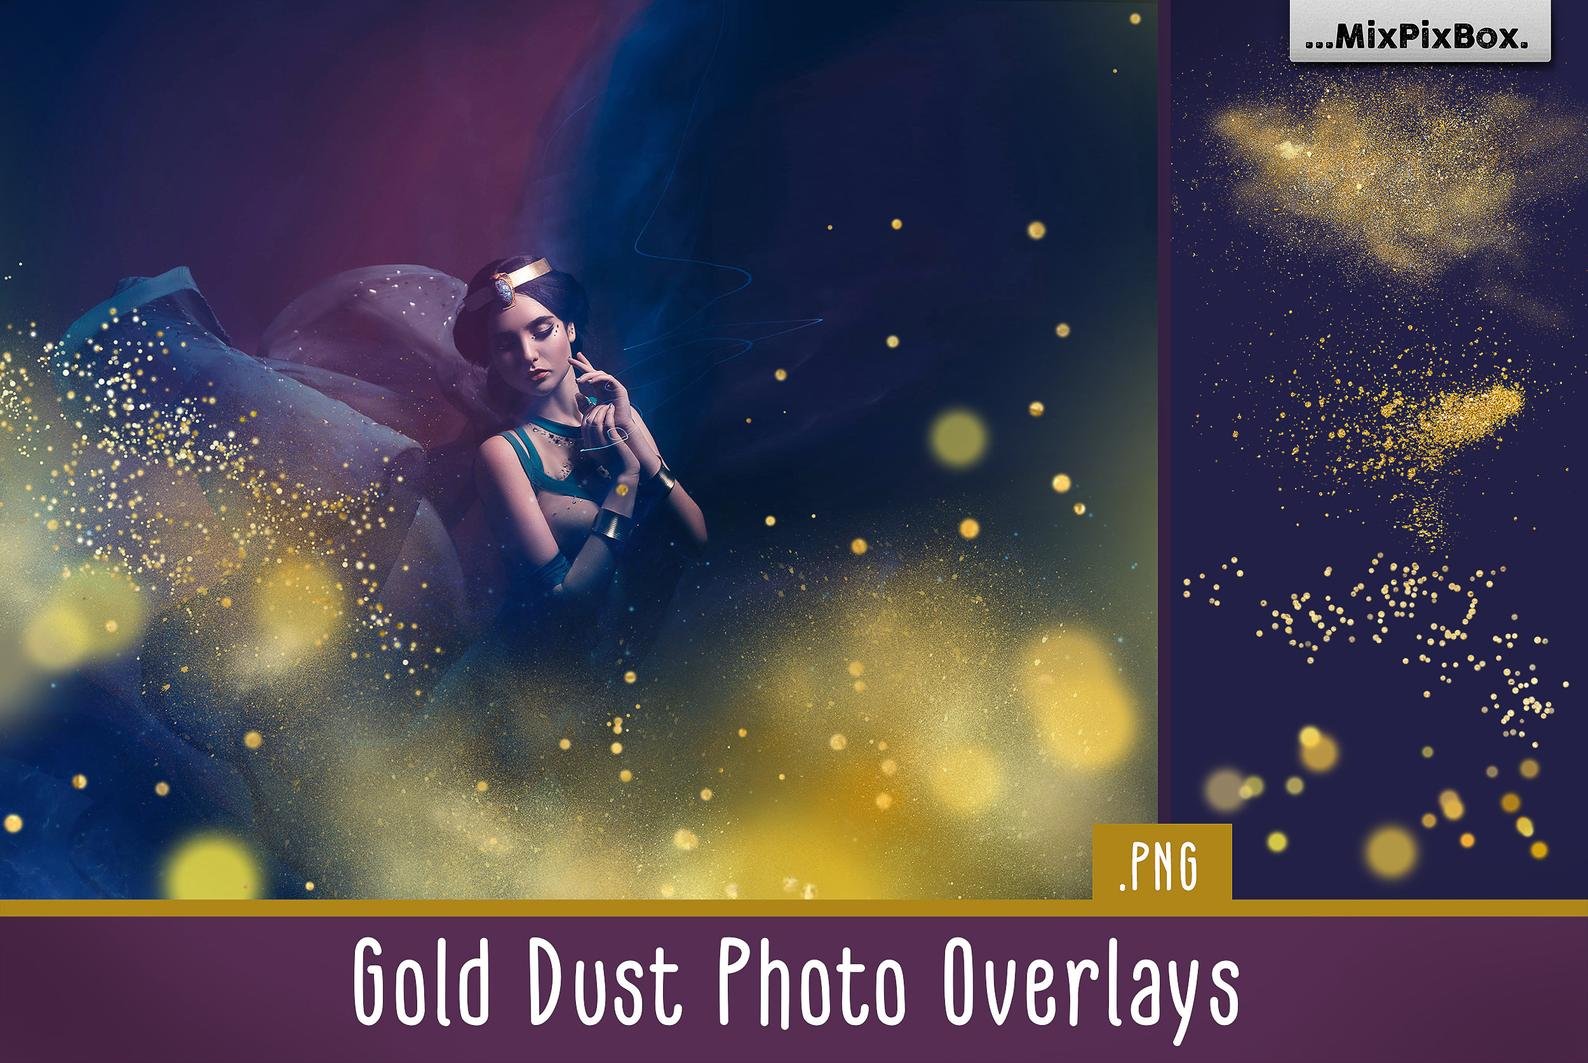 Gold Dust Photo Overlayscover image.